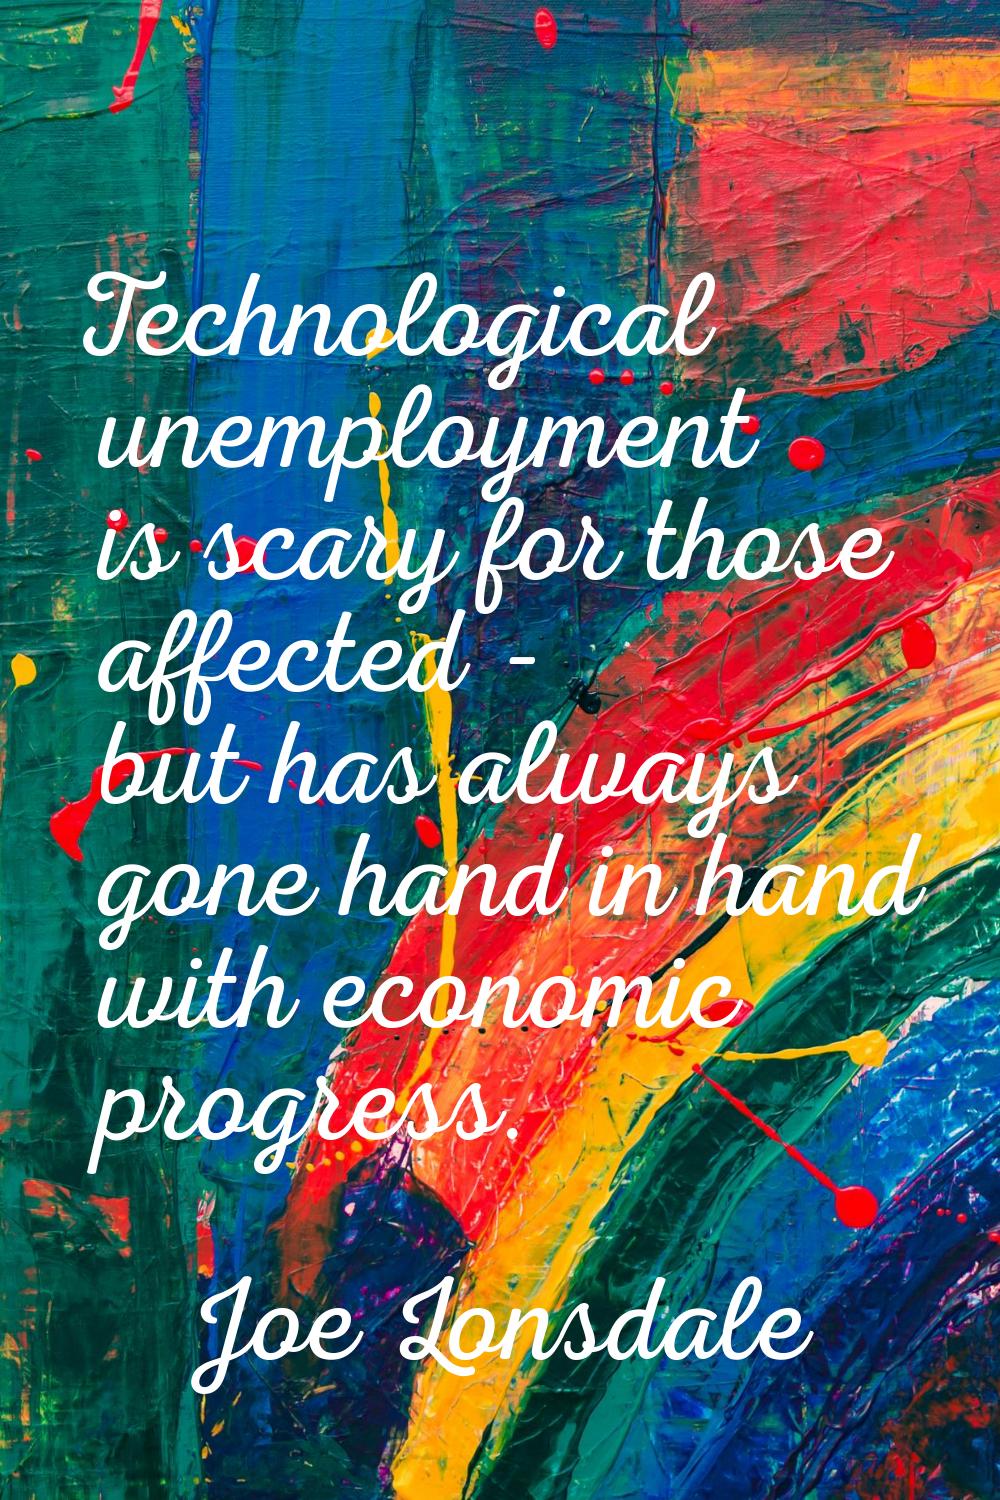 Technological unemployment is scary for those affected - but has always gone hand in hand with econ